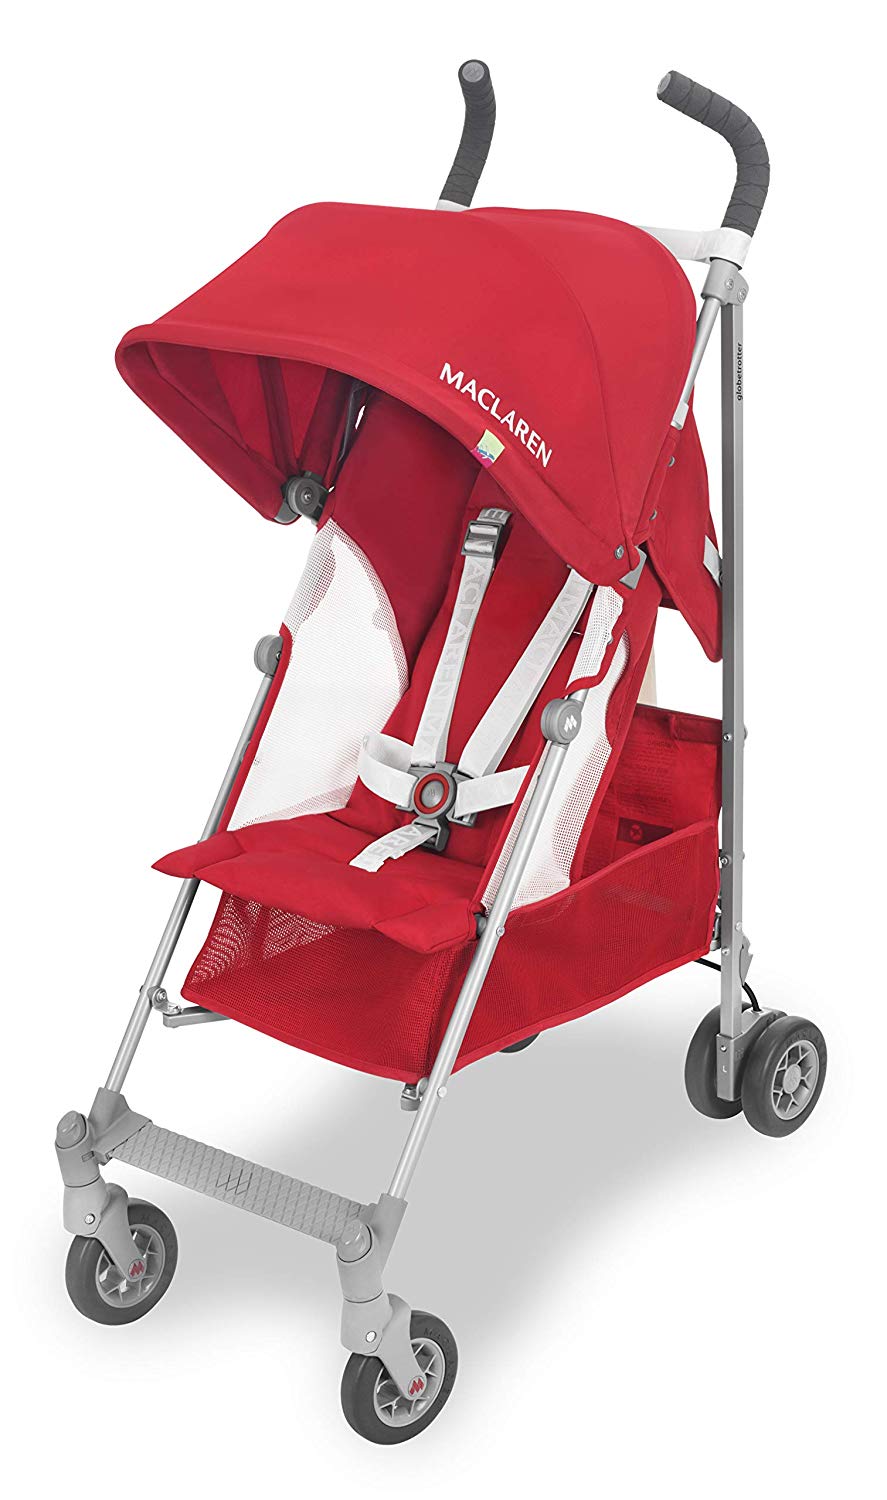 Maclaren Globetrotter Lightweight Compact Pushchair from 6 Months to 25 kg, Extendable Waterproof Hood UPF 50+, Reclining Seat, 4WD Suspension, Includes Rain Cover, Cardinal/White